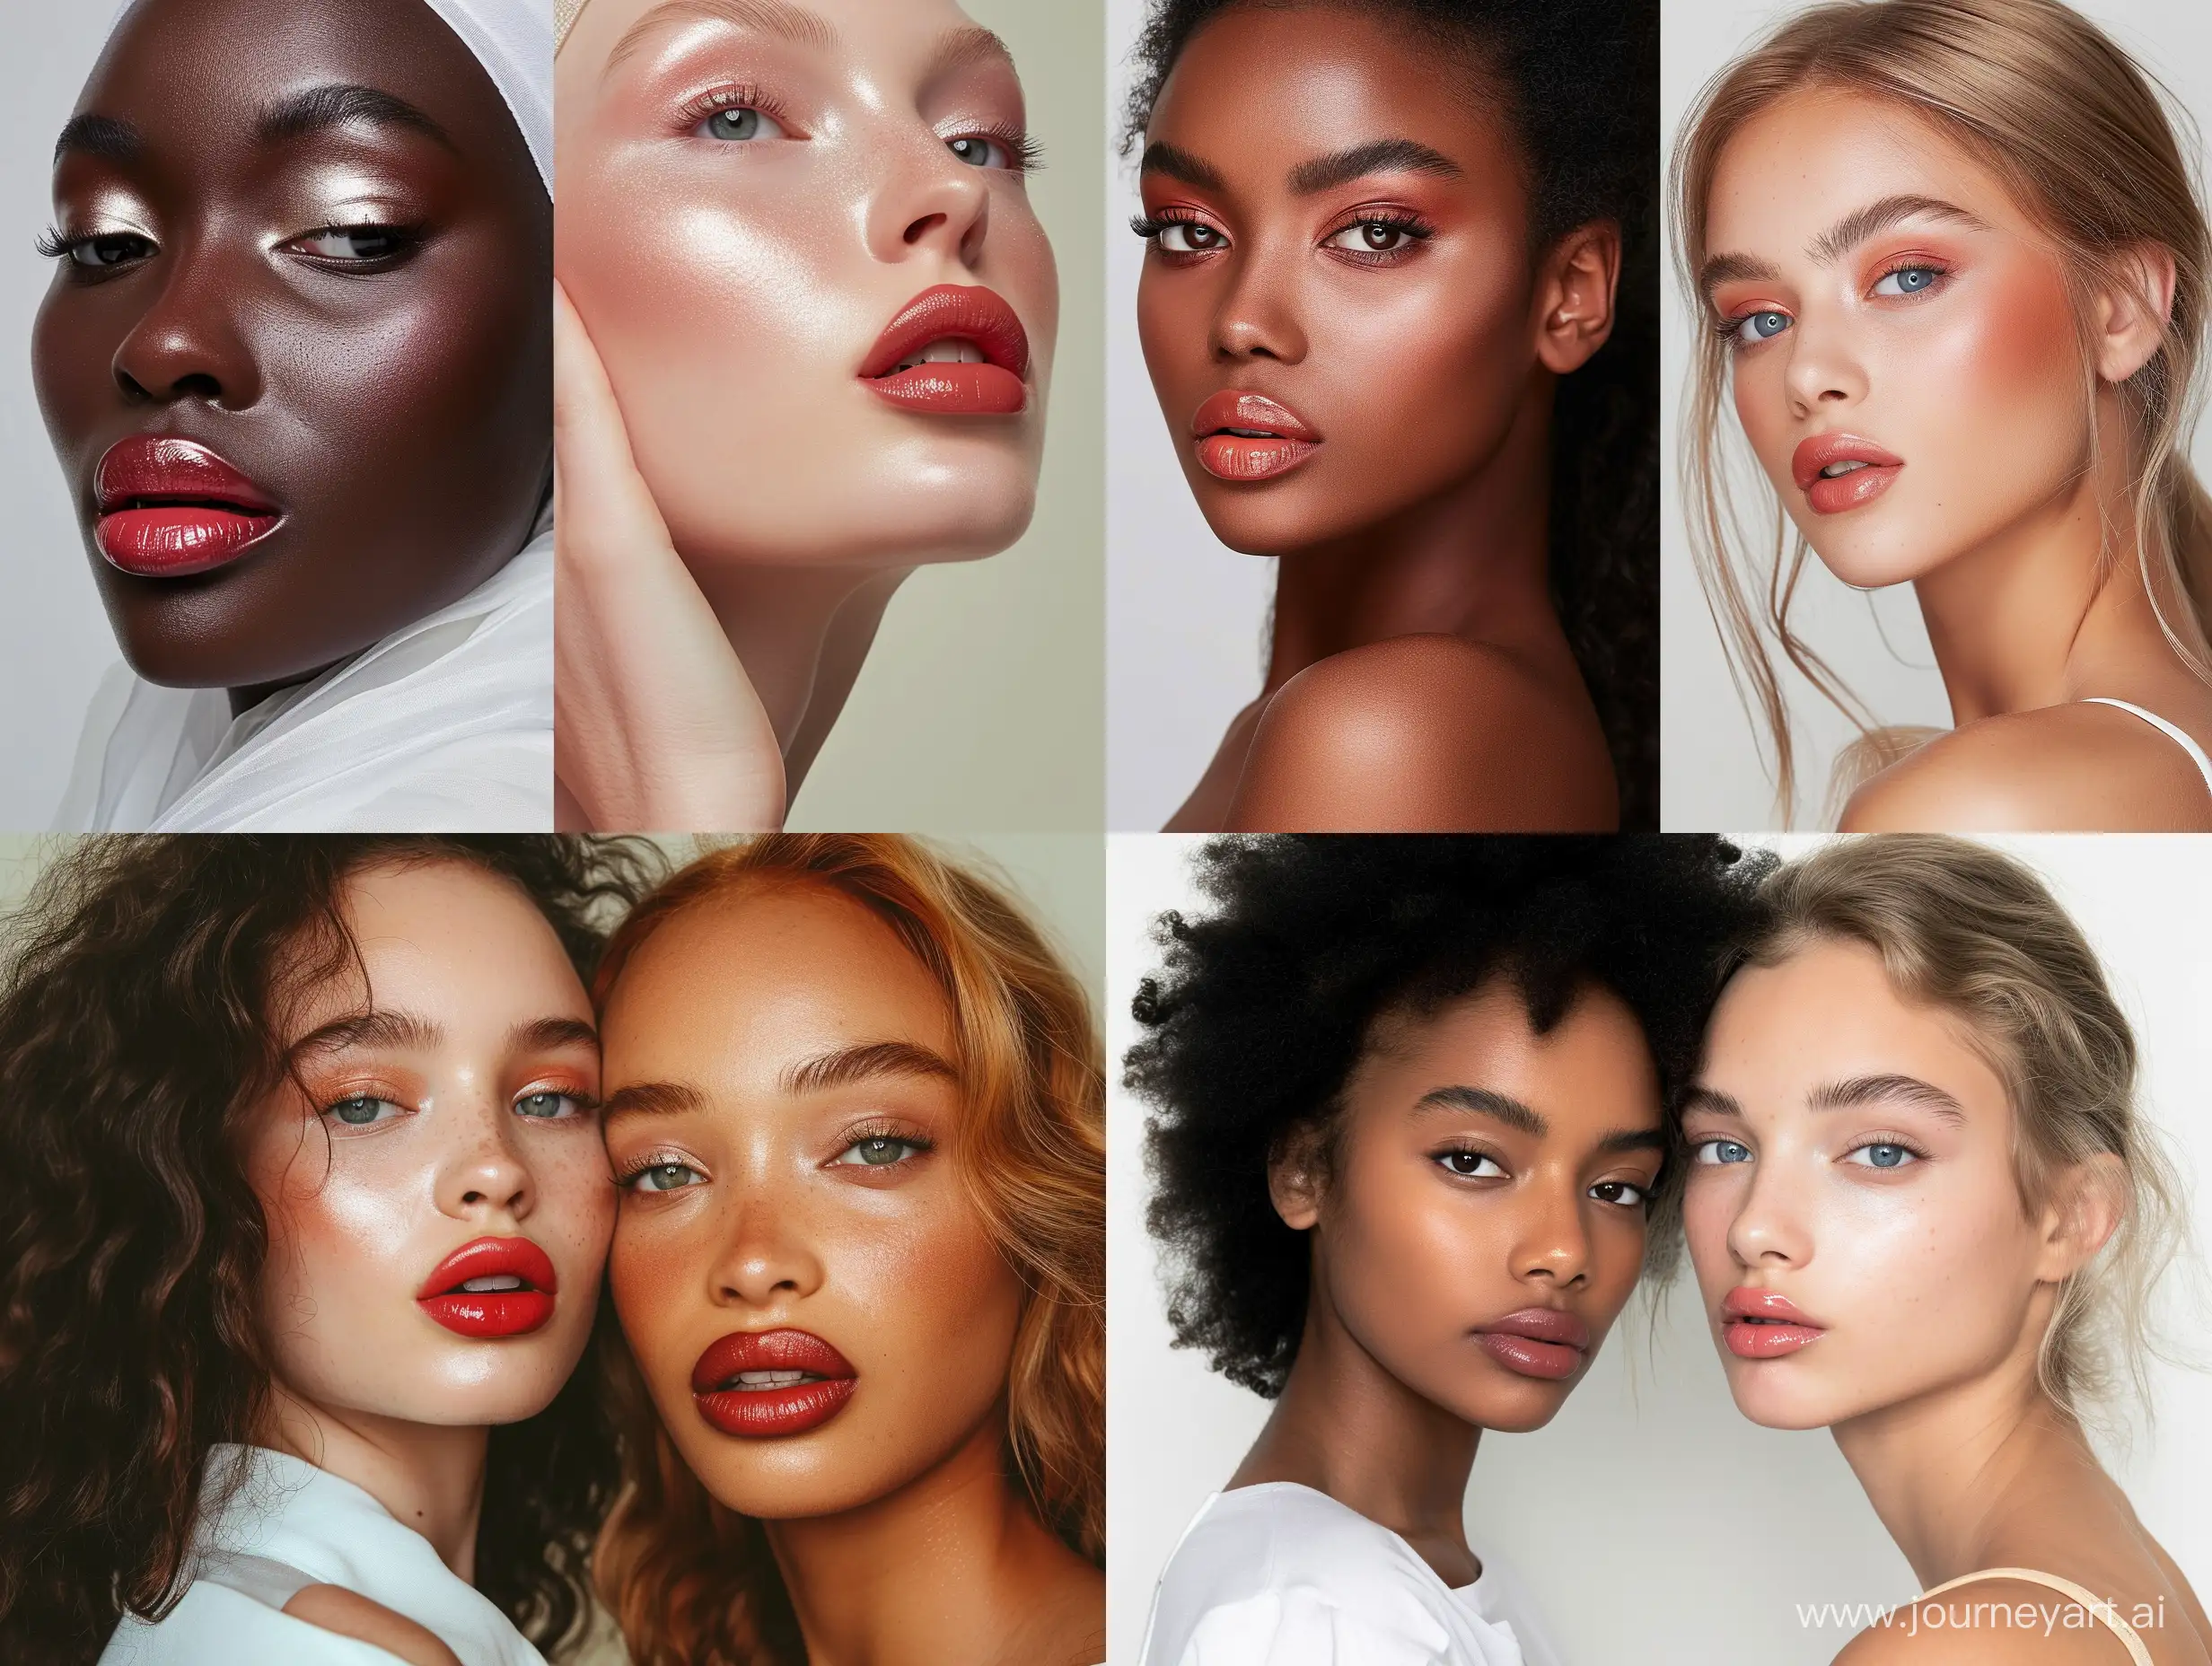 white and black women modeling lip gloss and makeup brand